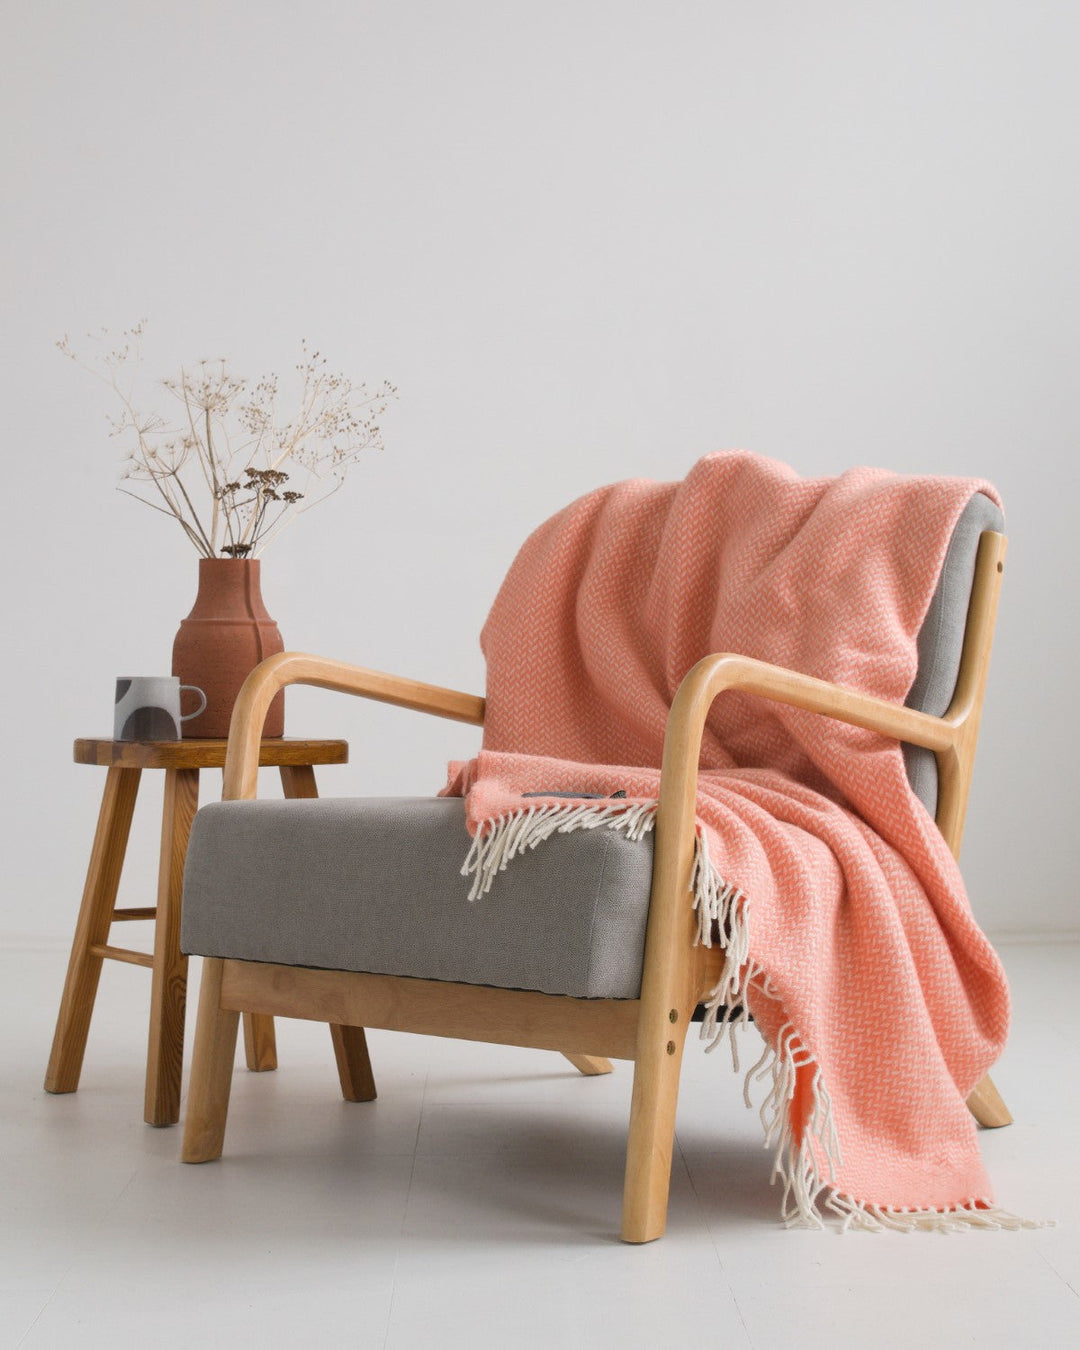 Extra large pink herringbone wool blanket draped over a lounge chair